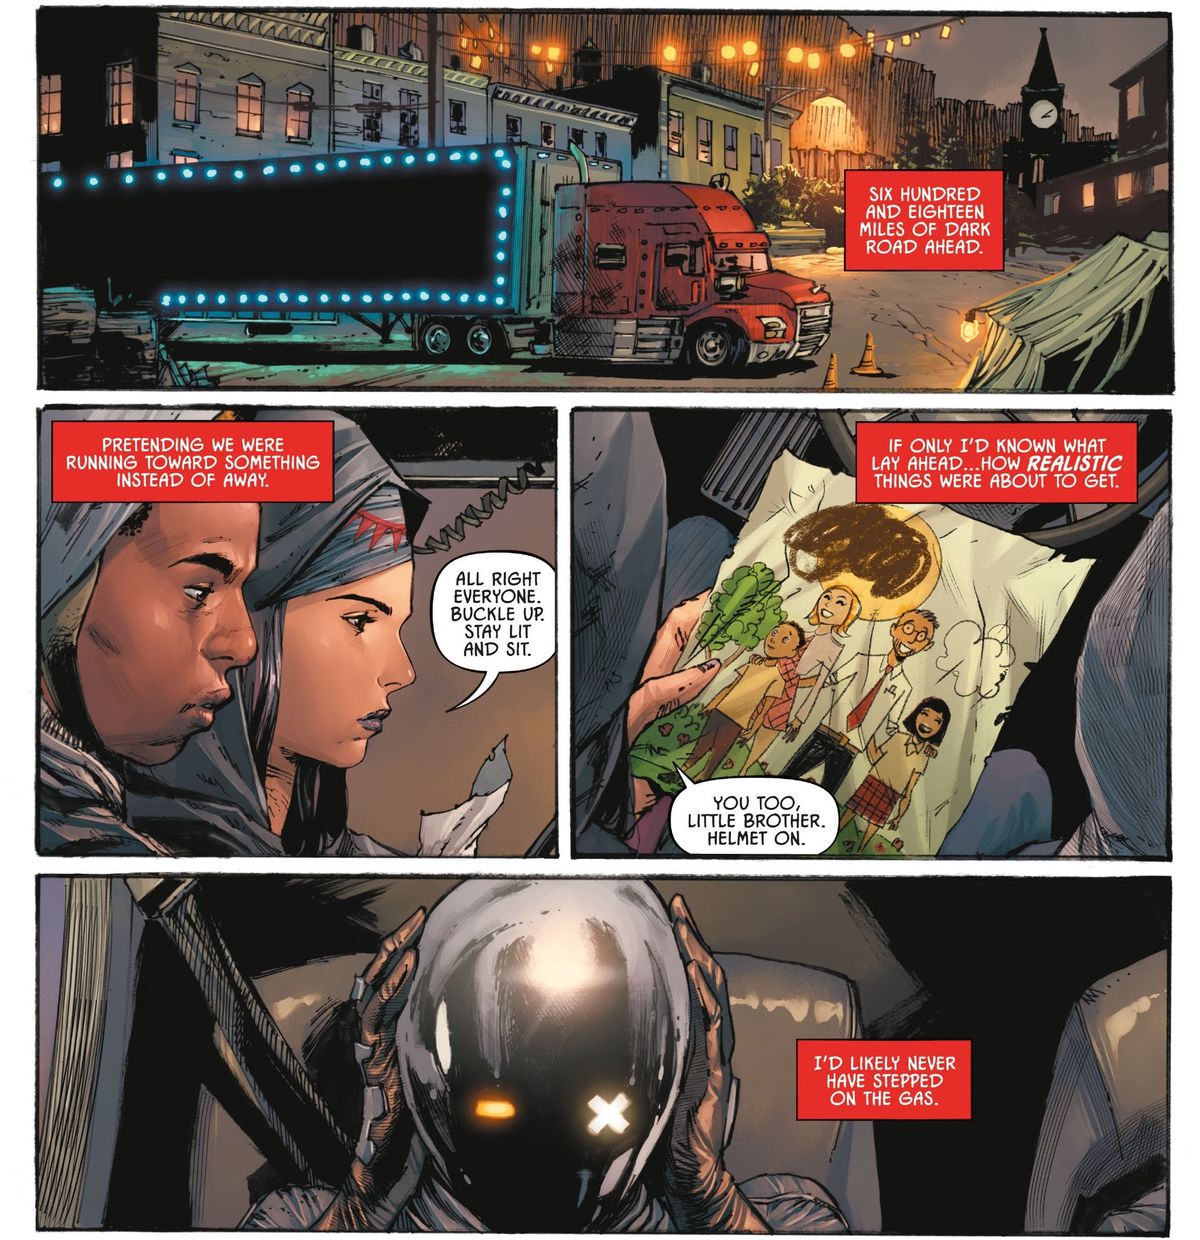 A trailer-hauling semi truck strung with lights pulls out of a small town. “All right everyone,” says its driver, as her brother pulls on a Daft Punk-style helmet, “Buckle up. Stay lit and sit.” Nocterra #1, Image Comics (2021). 